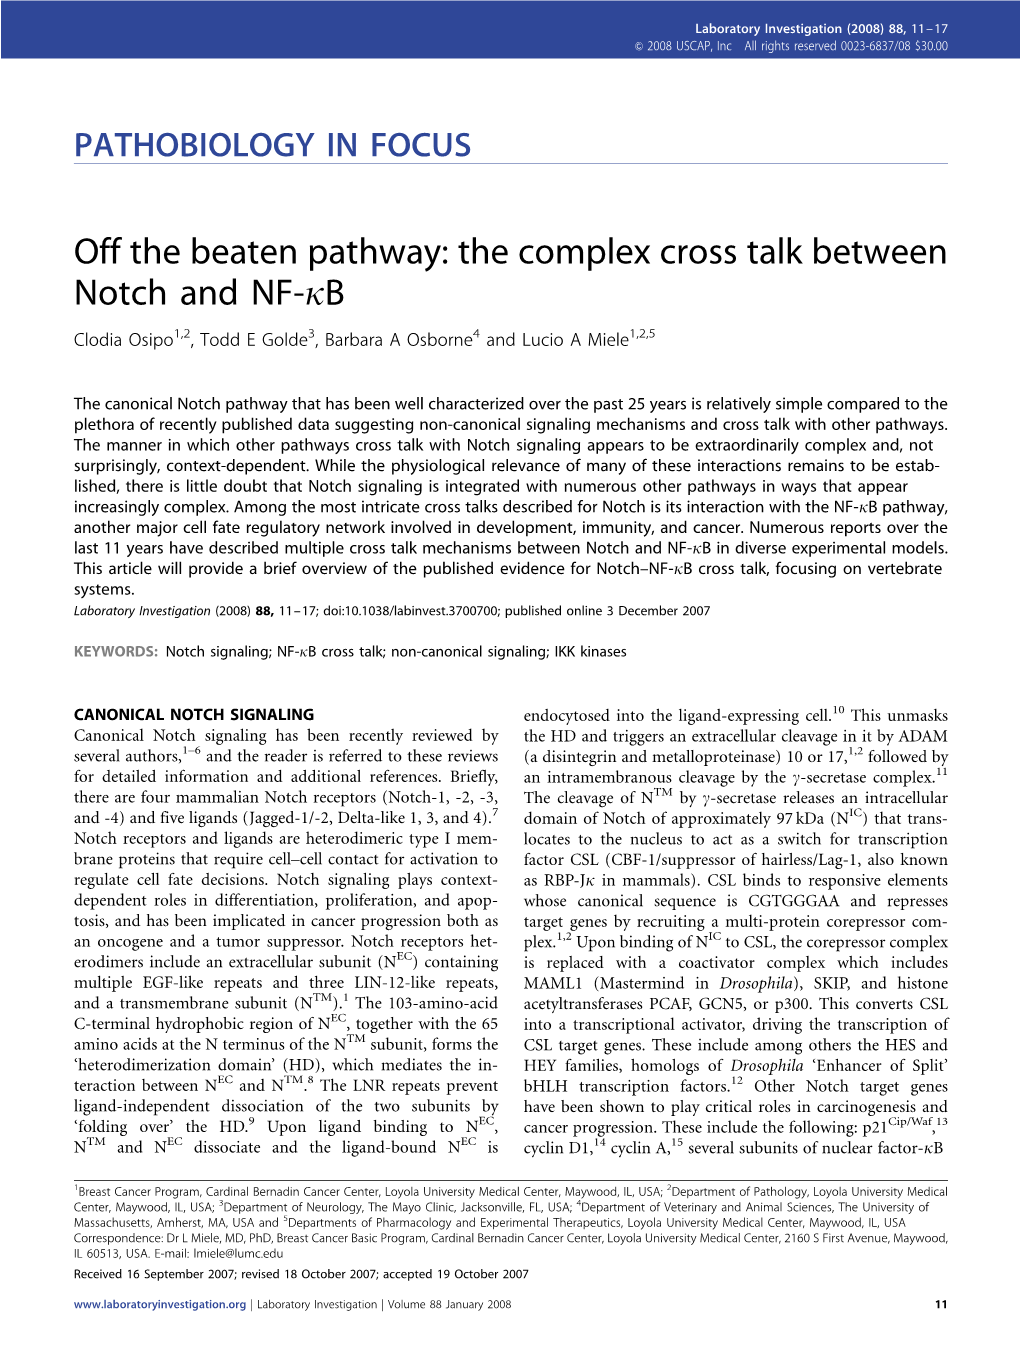 Off the Beaten Pathway: the Complex Cross Talk Between Notch and NF-Kb Clodia Osipo1,2, Todd E Golde3, Barbara a Osborne4 and Lucio a Miele1,2,5